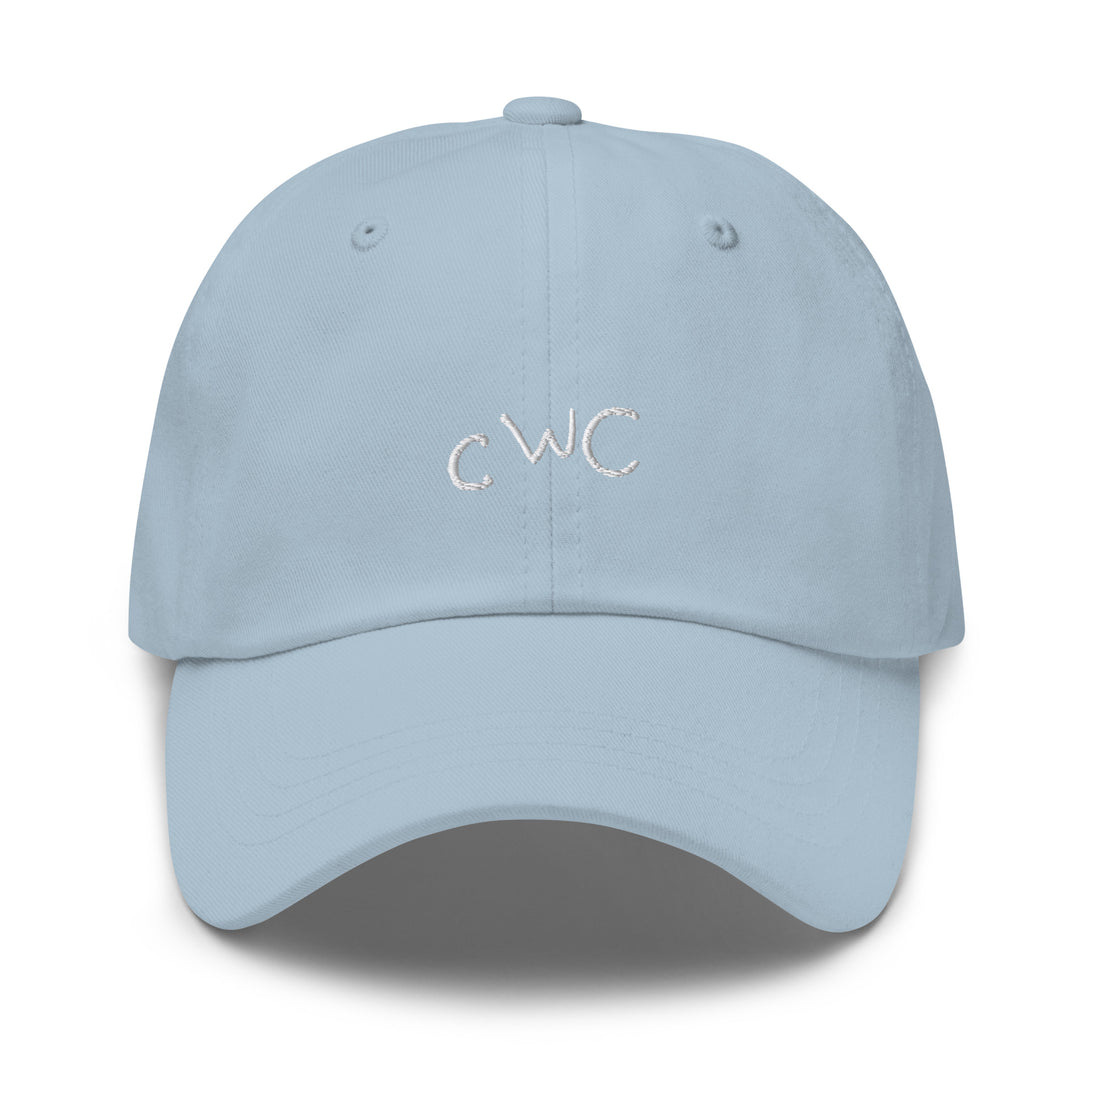 OMJ X CWC Dad hat